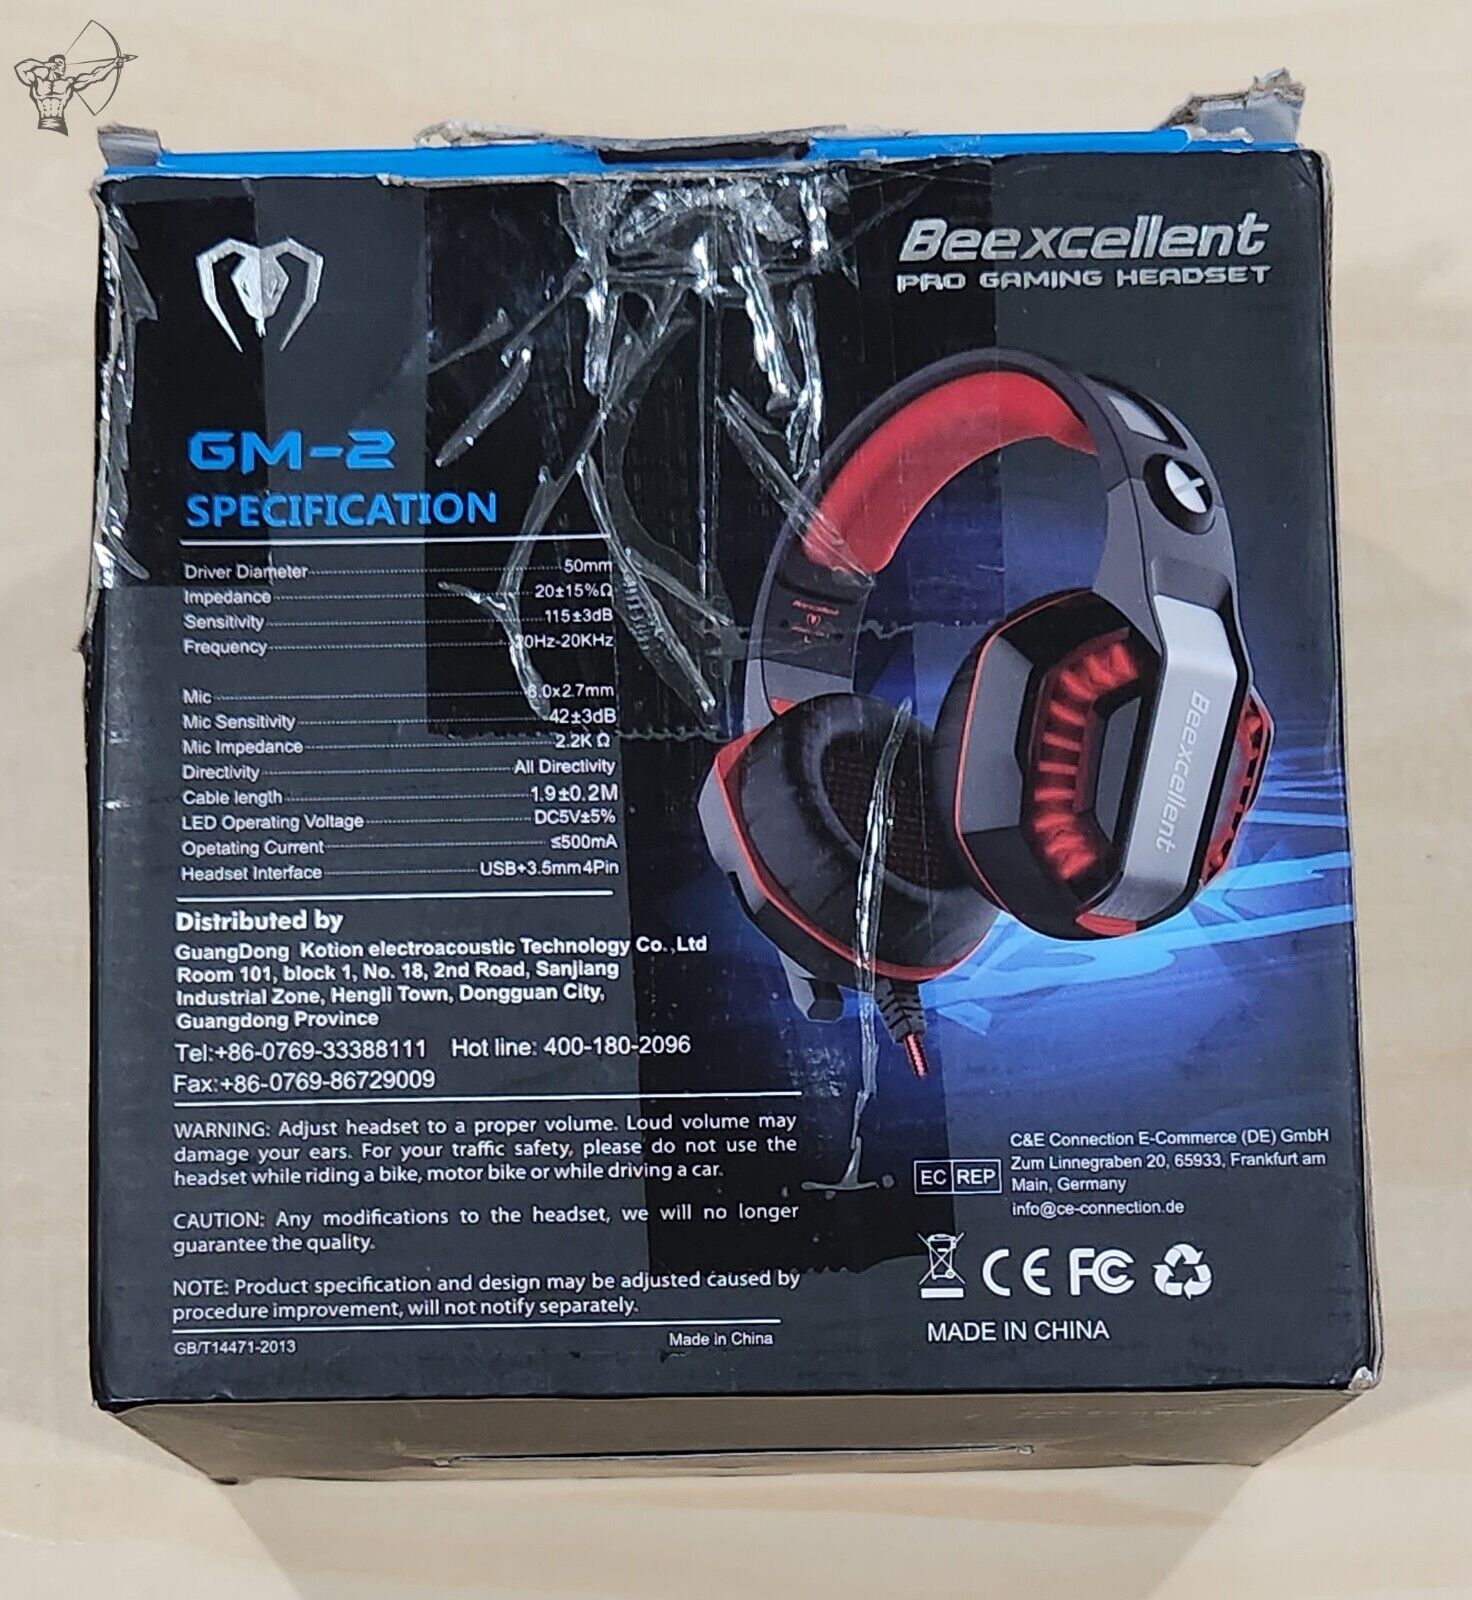 Beexcellent Pro Gaming Headset, GM-2 Specification, Open Box but item is fine